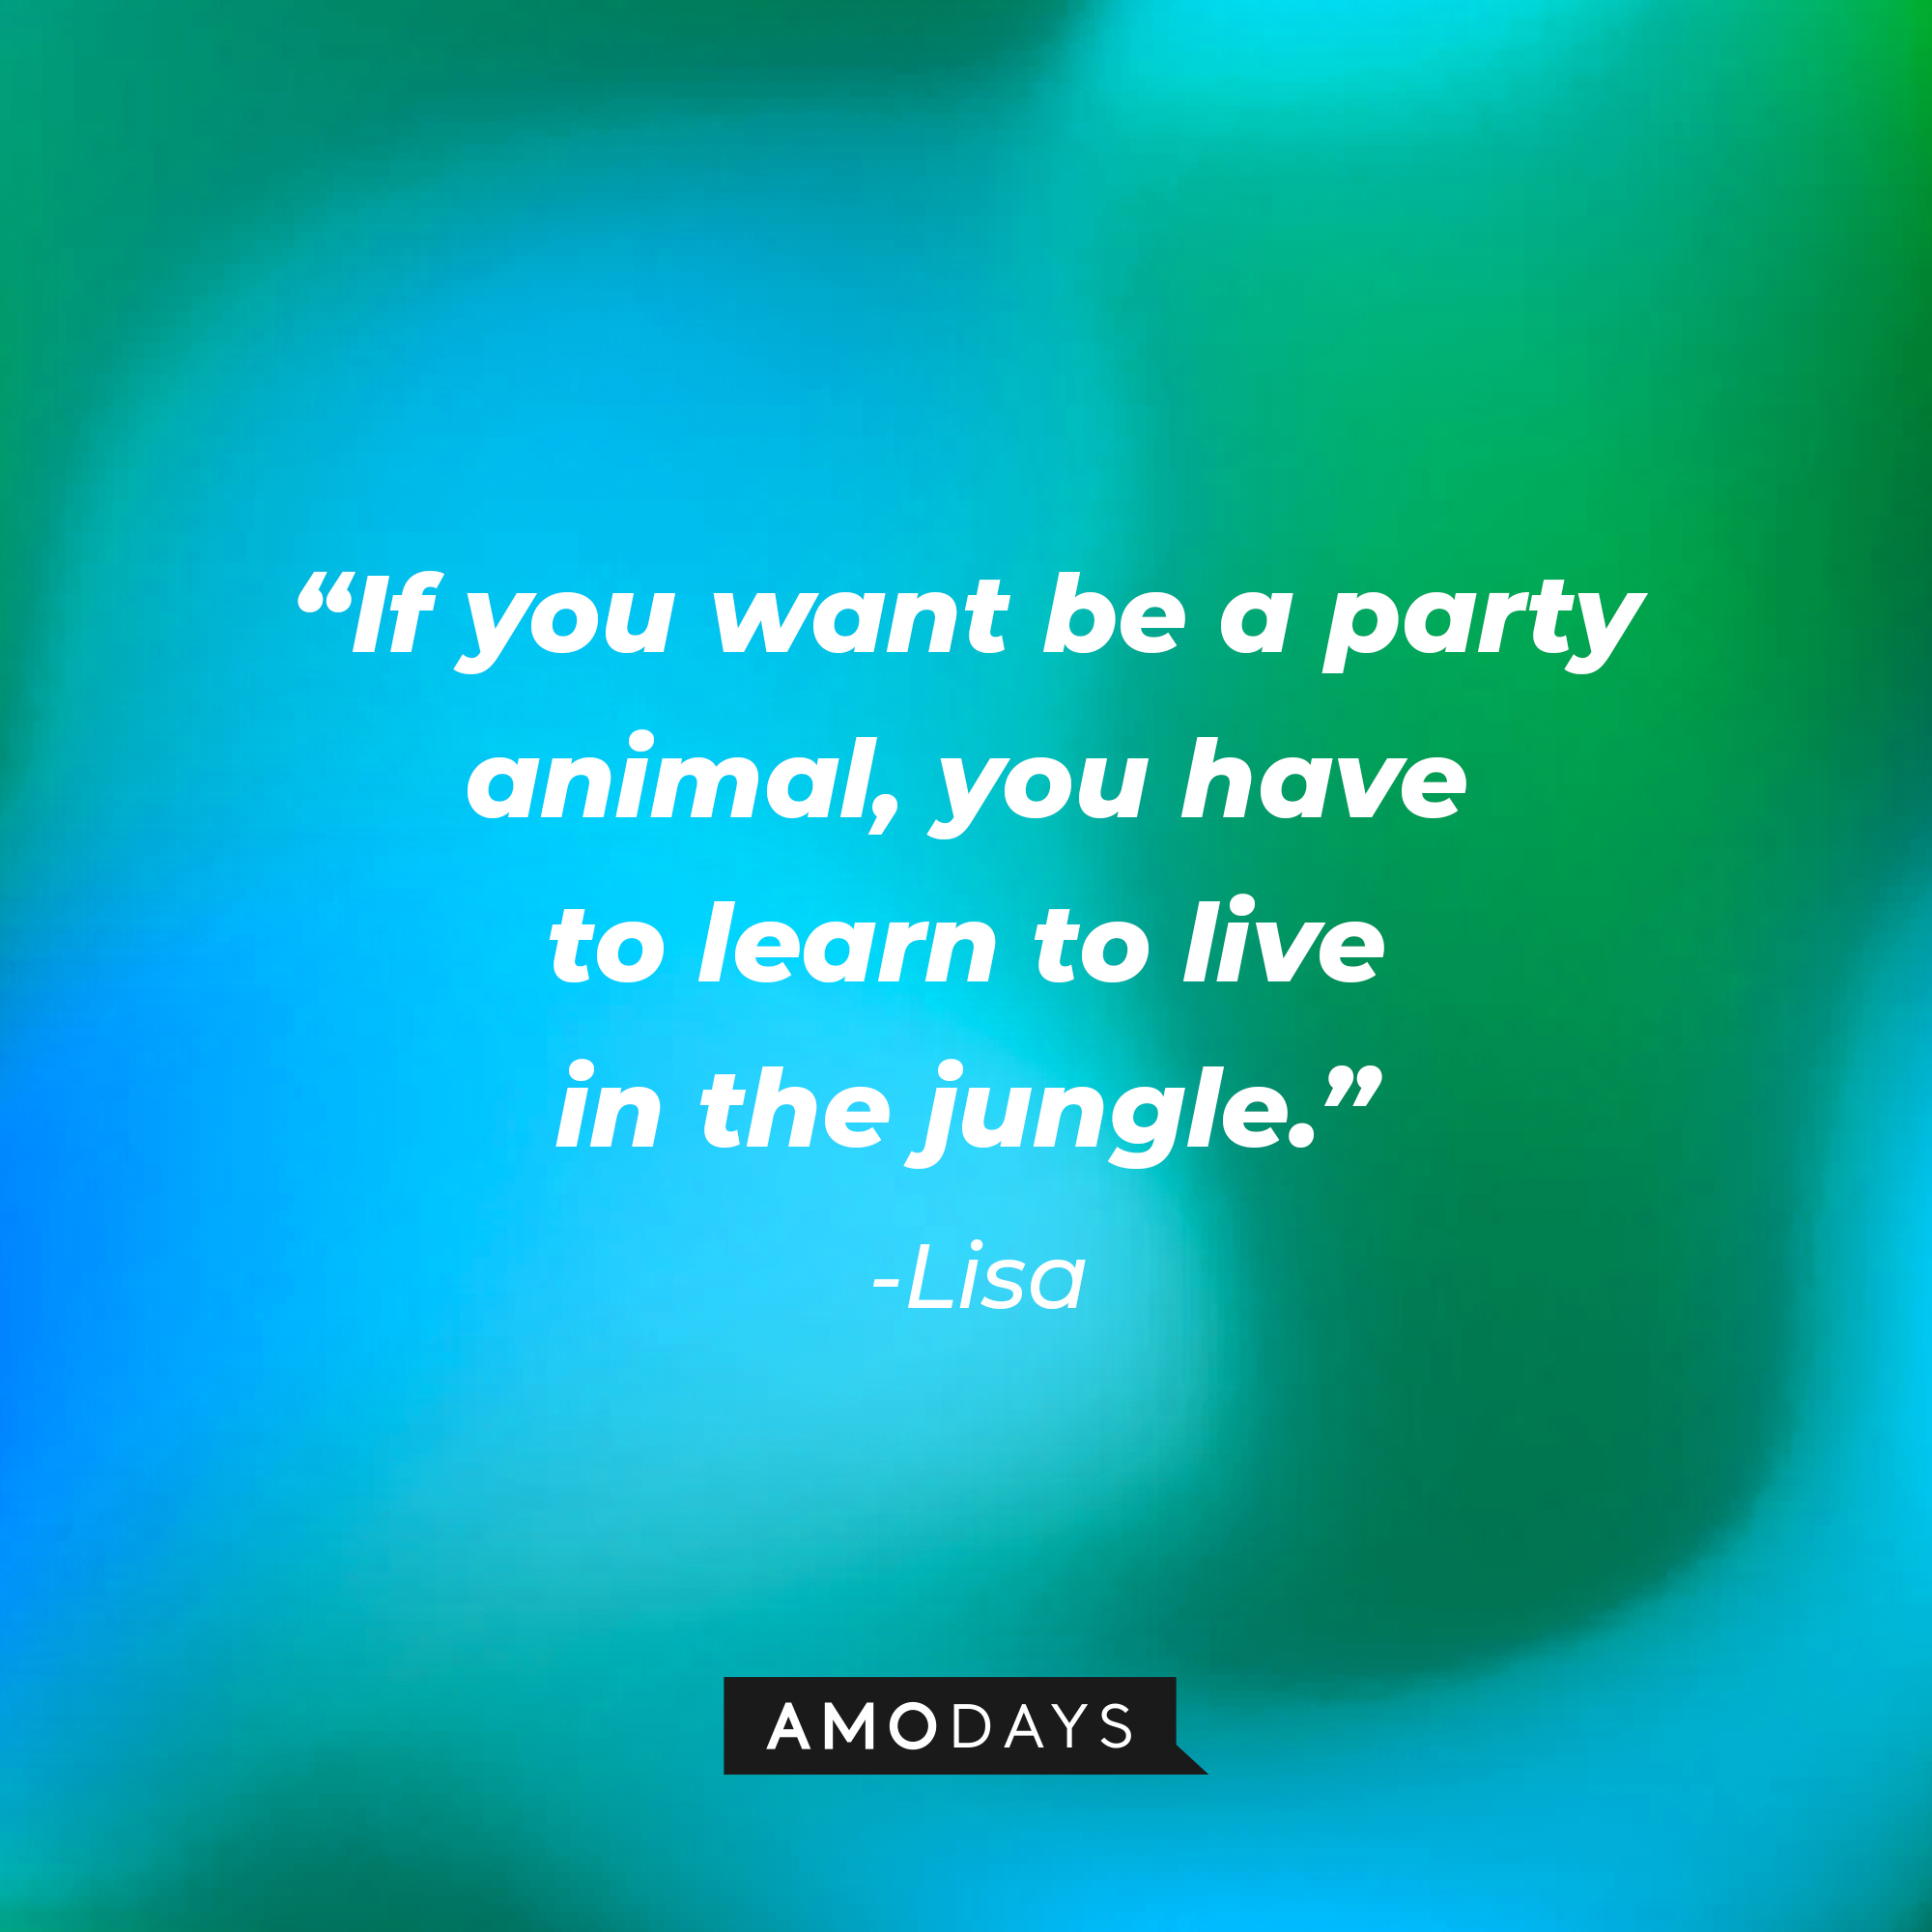 Lisa’s quote: “If you want to be a party animal, you have to learn to live in the jungle.” | Source: AmoDays